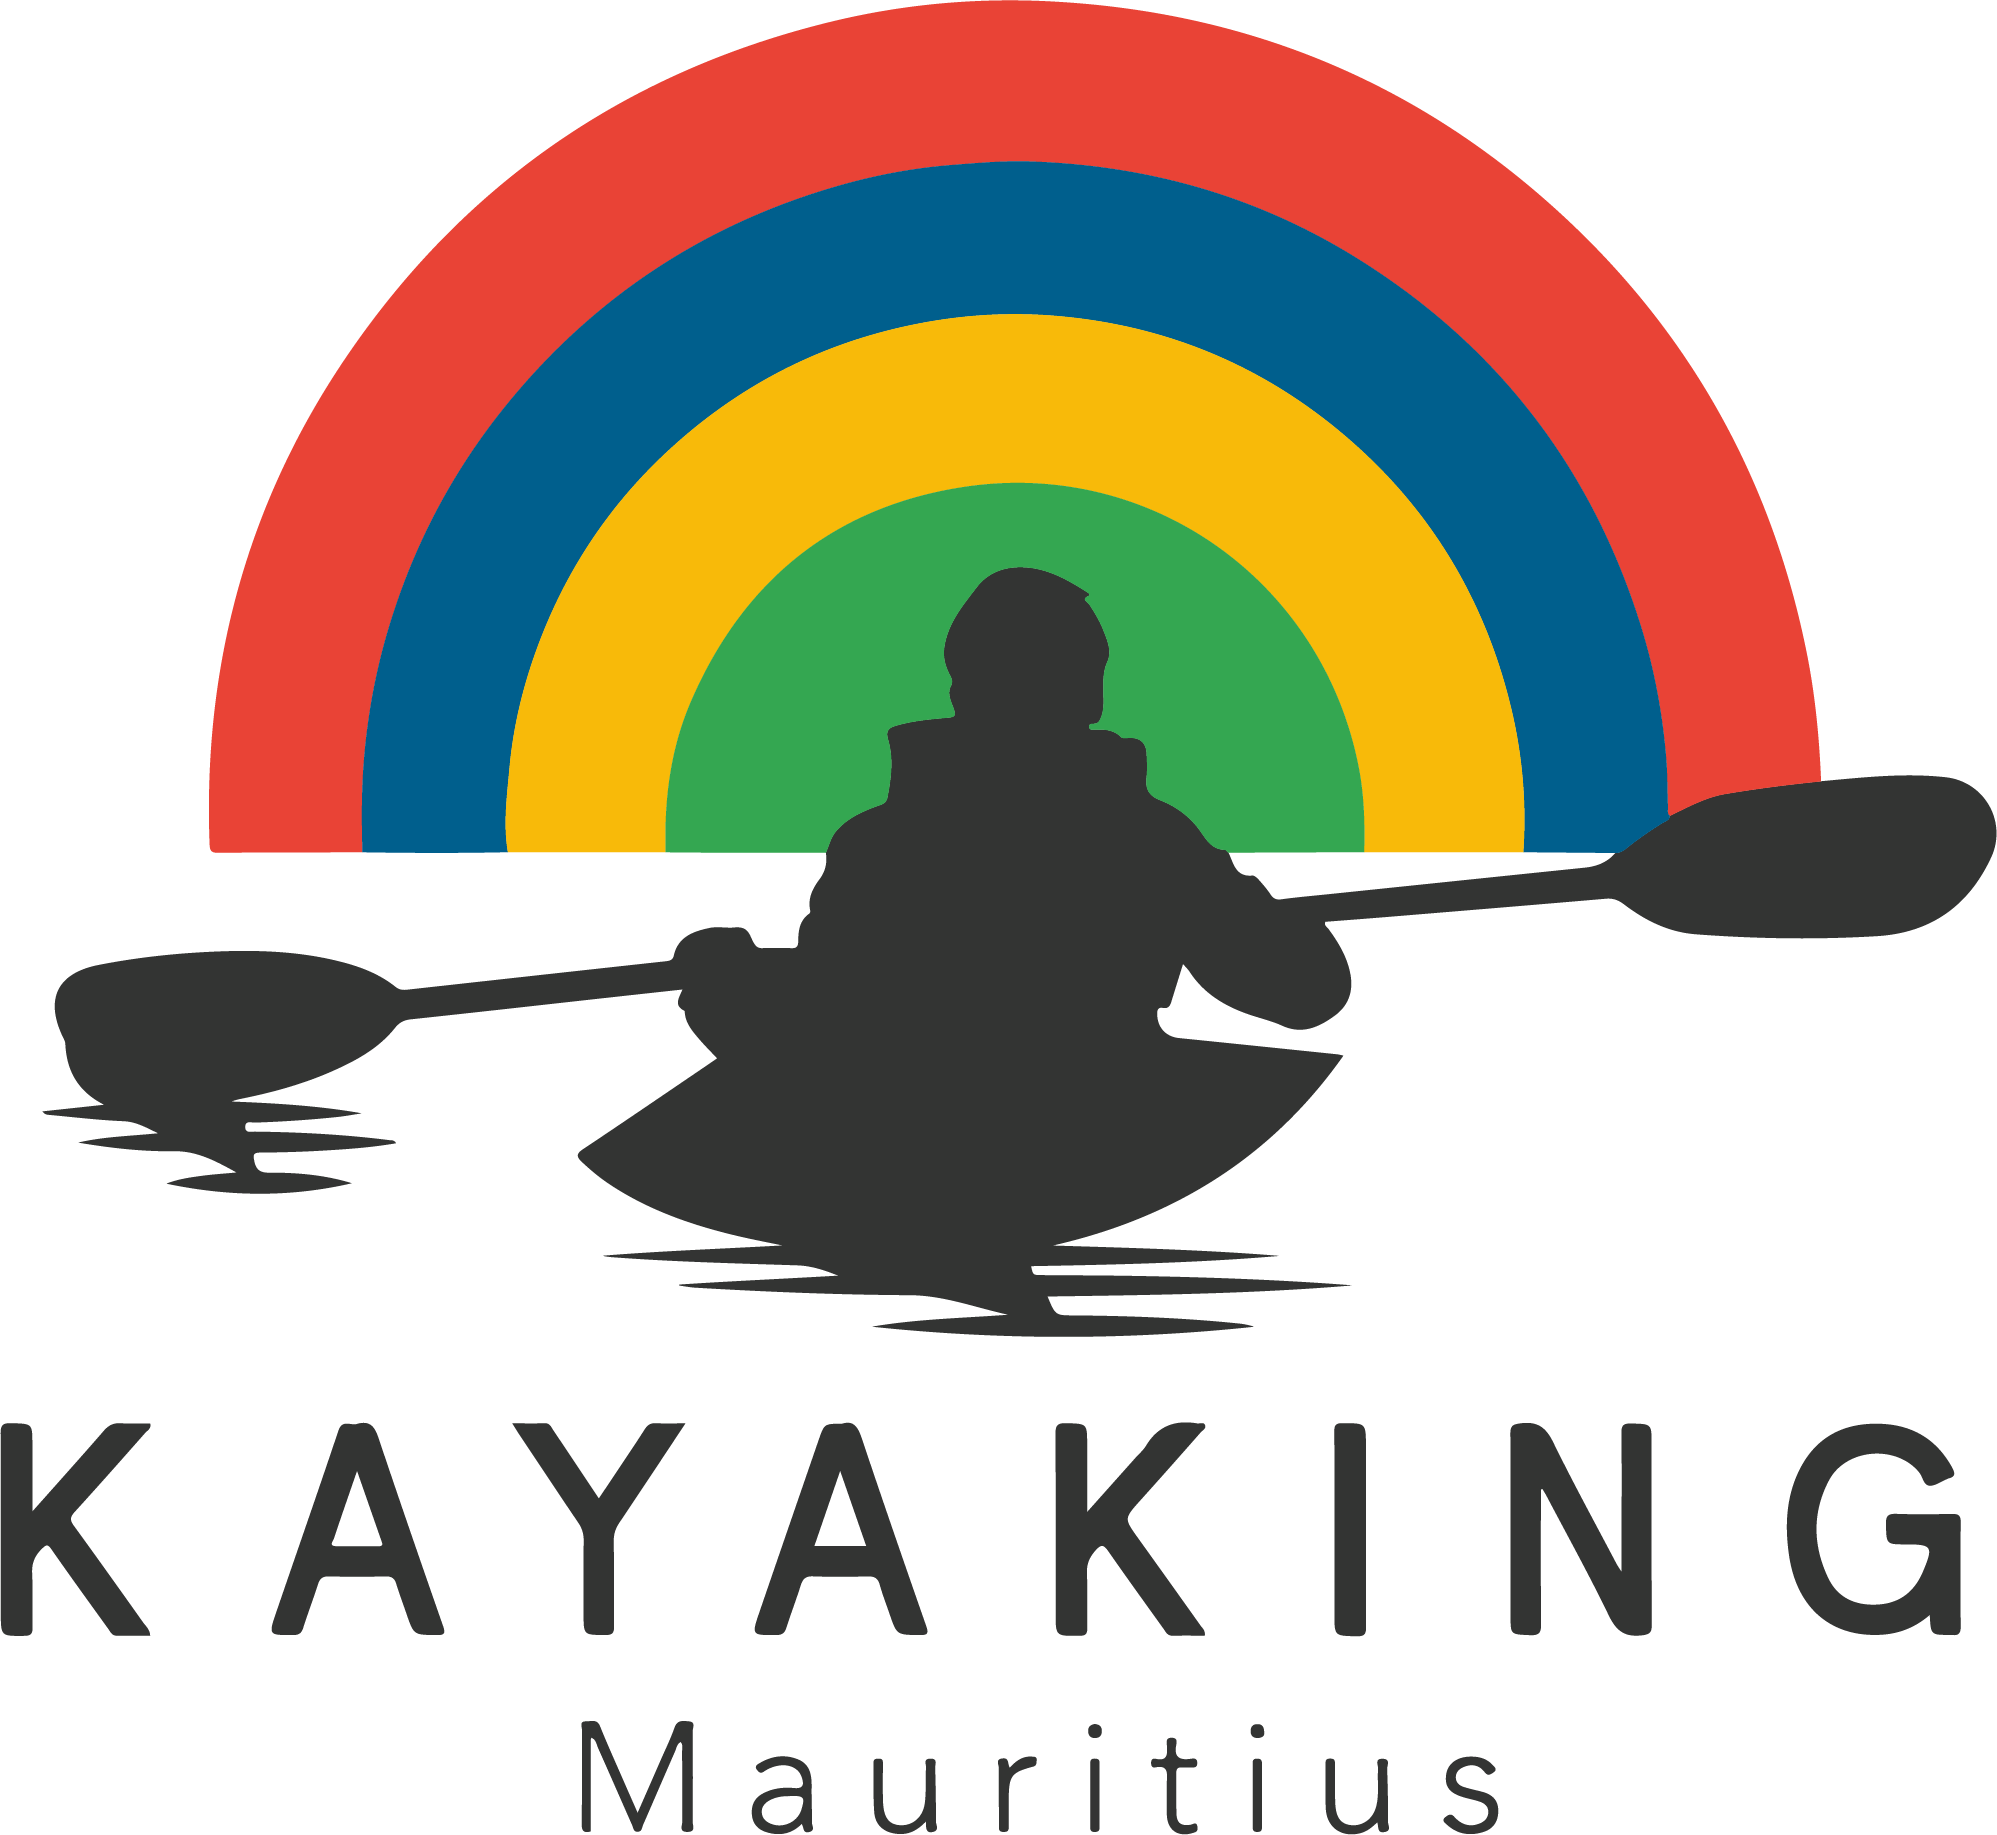 Logo of our company Kayaking Mauritius. It has a mauritian flag as a rainbow in the background and a person kayaking in the foreground